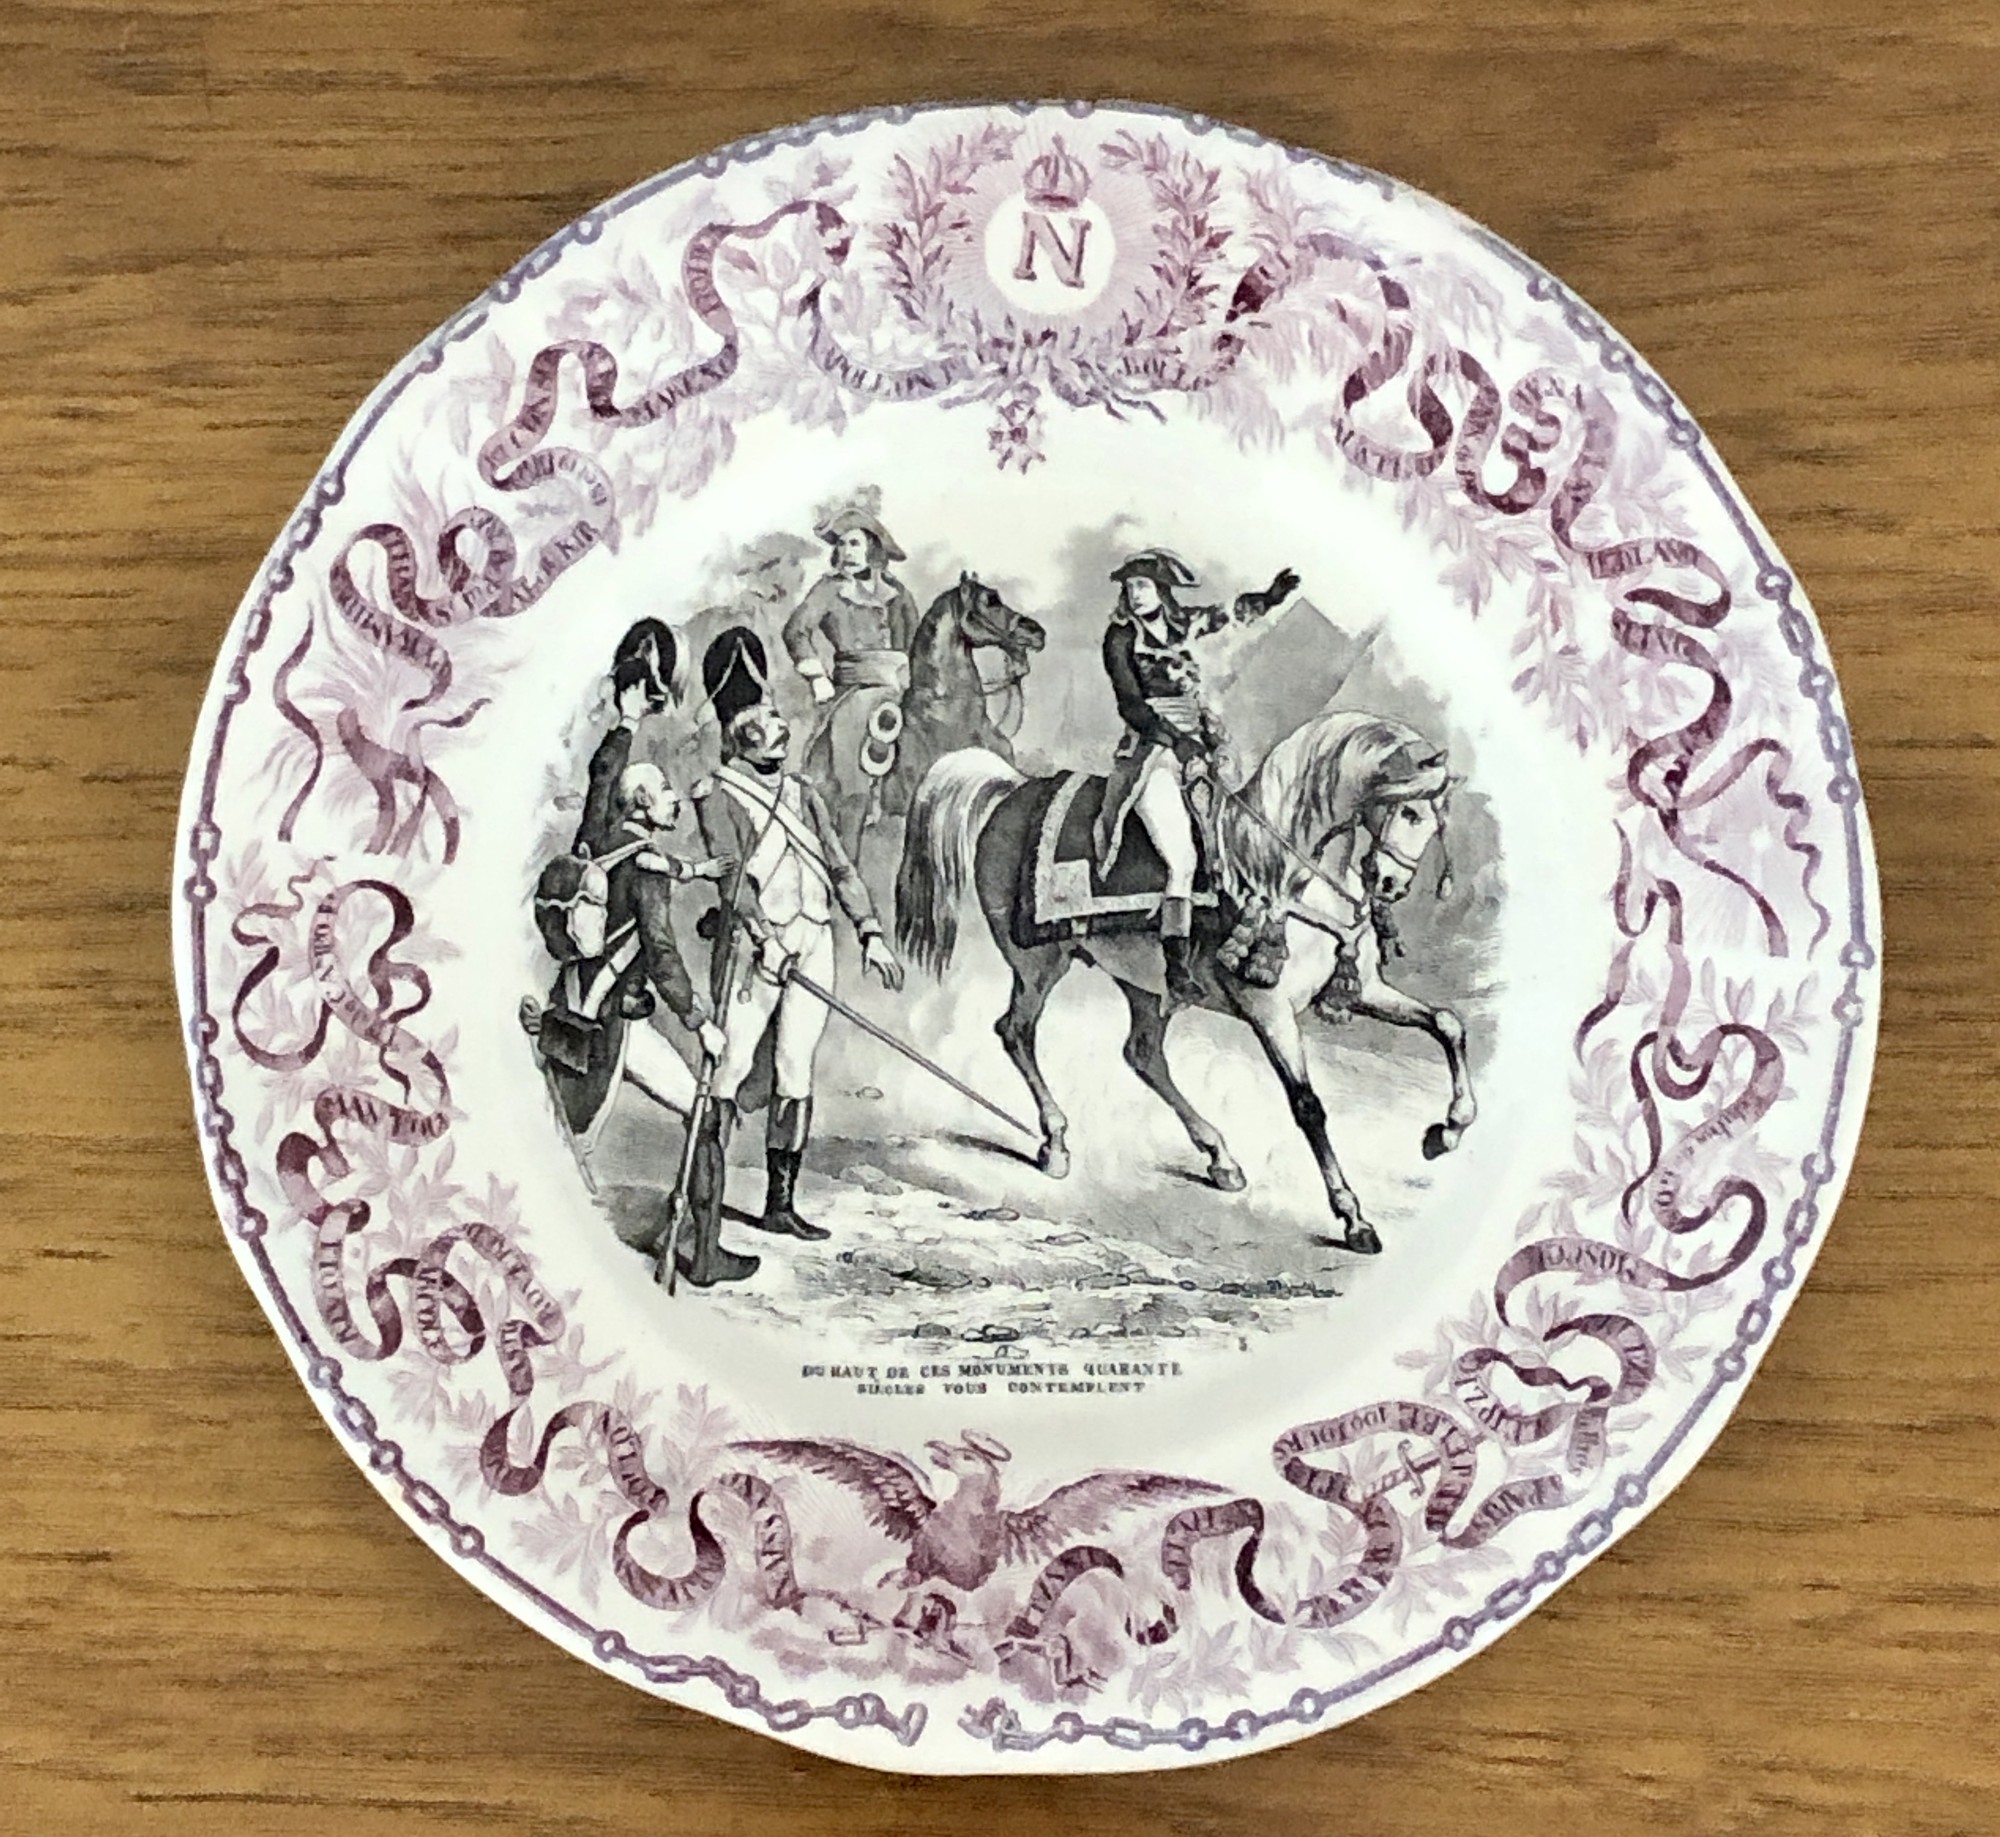 French Napoleon Commerative Assiettes Parlantes Plate. c.1840s Due Haut de Ces Monuments Qurante Siecles vous Contemplent
Assiettes Parlantes, or talking plates, are French transferware plates with sayings on them. The most collectible illustrate the life of a French hero such as the plates depicting Napoleon. Really unusual to find in purple. 8